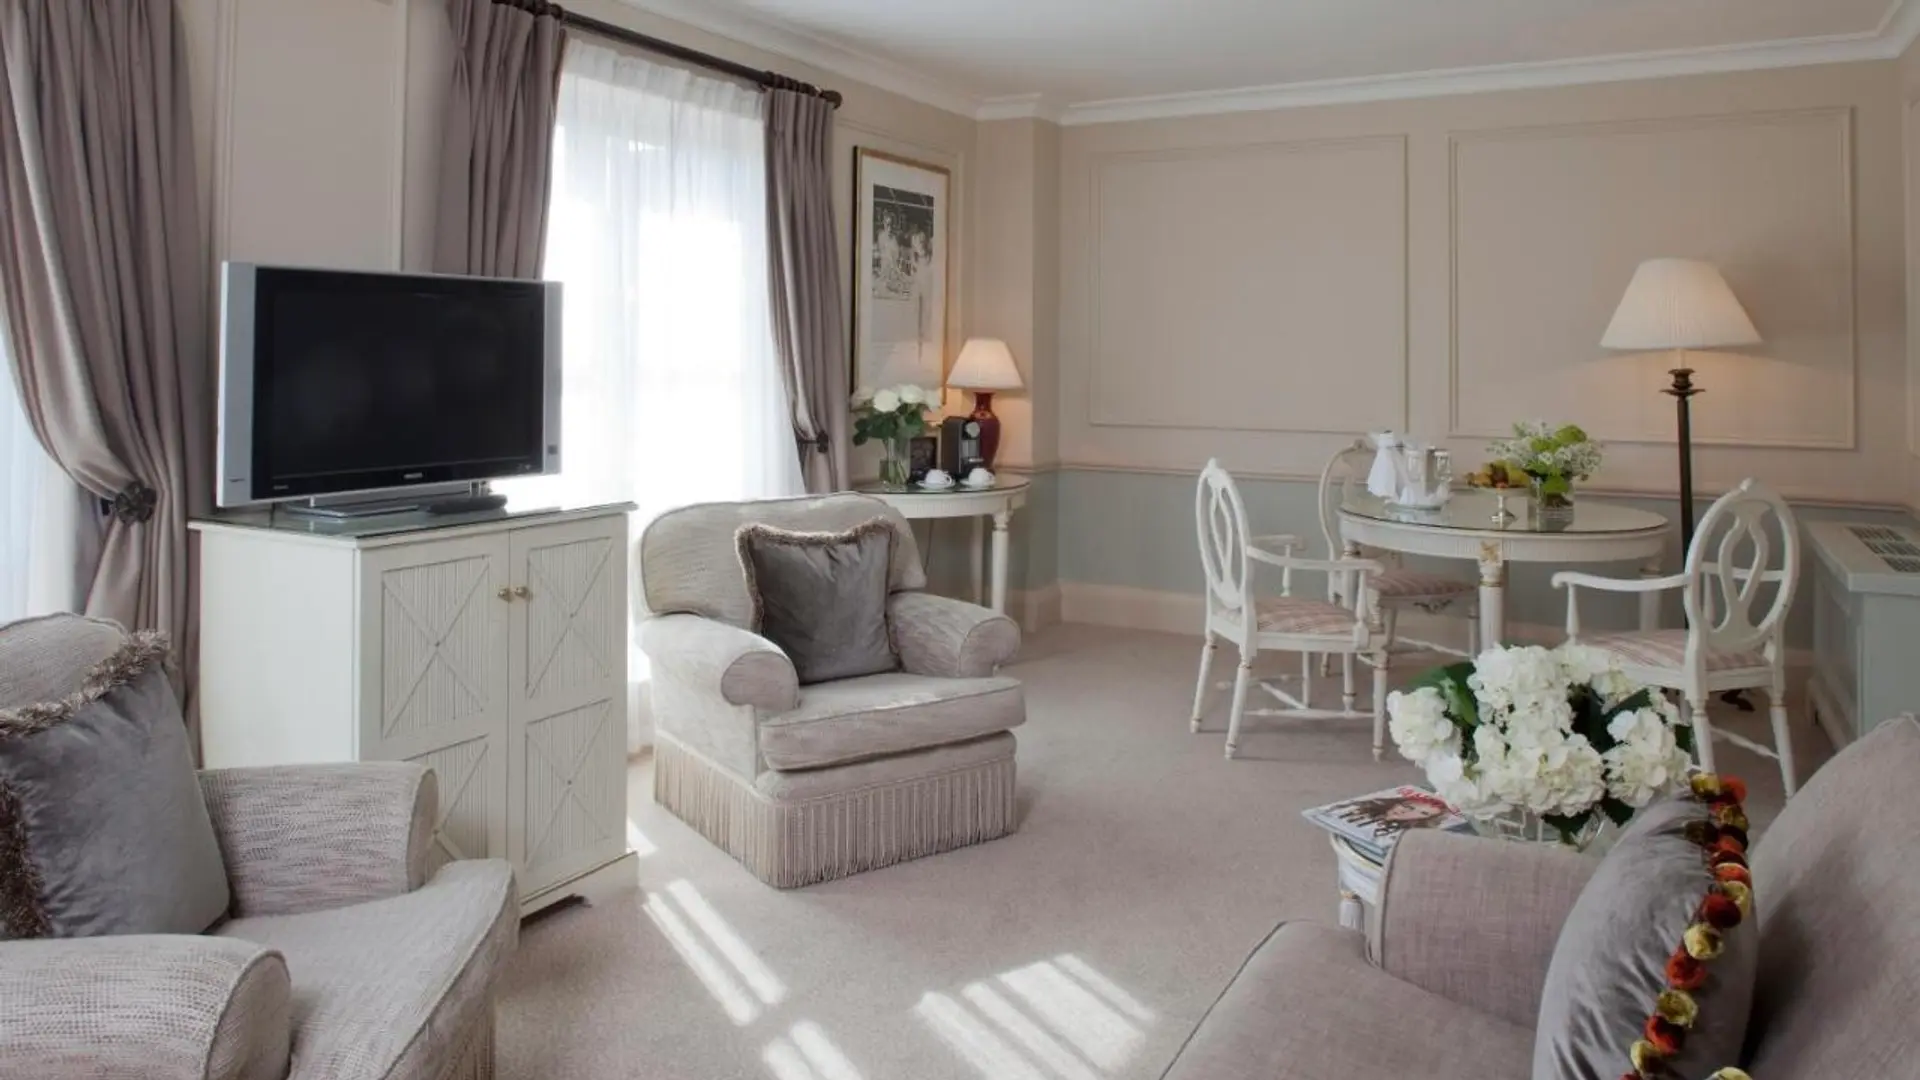 Hotel review Accommodation' - The Merrion Hotel - 6